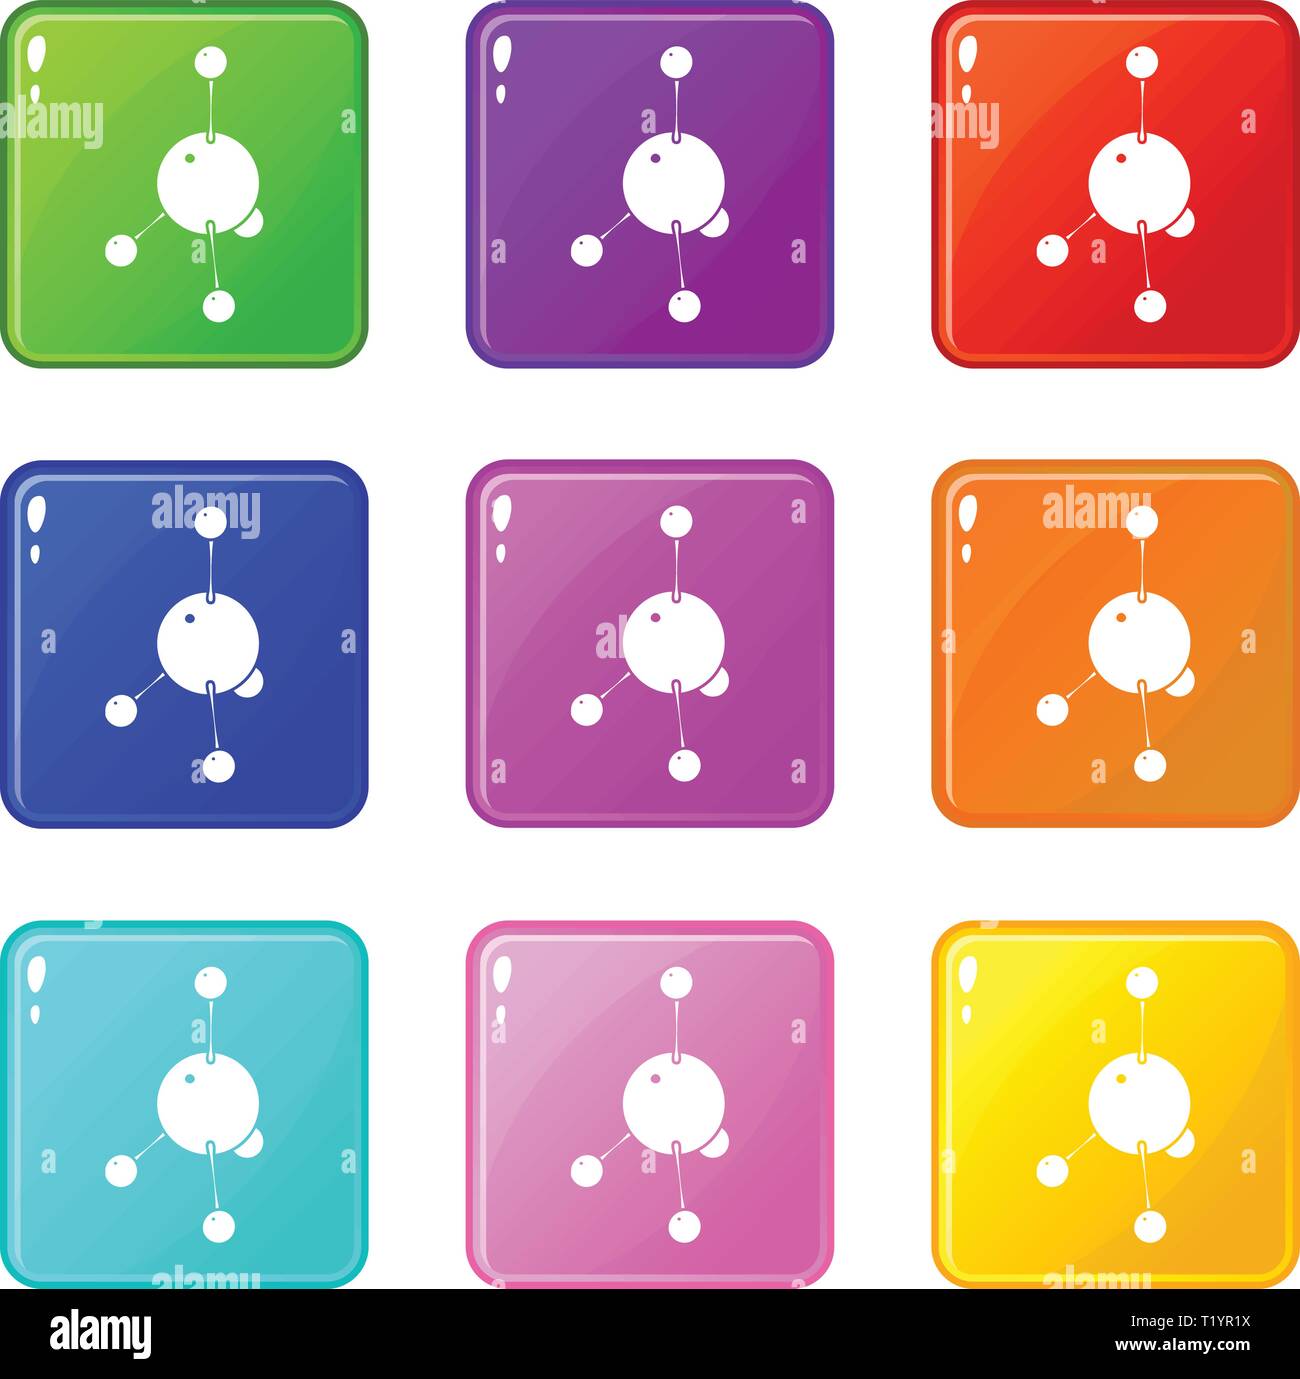 Acetone icons set 9 color collection Stock Vector